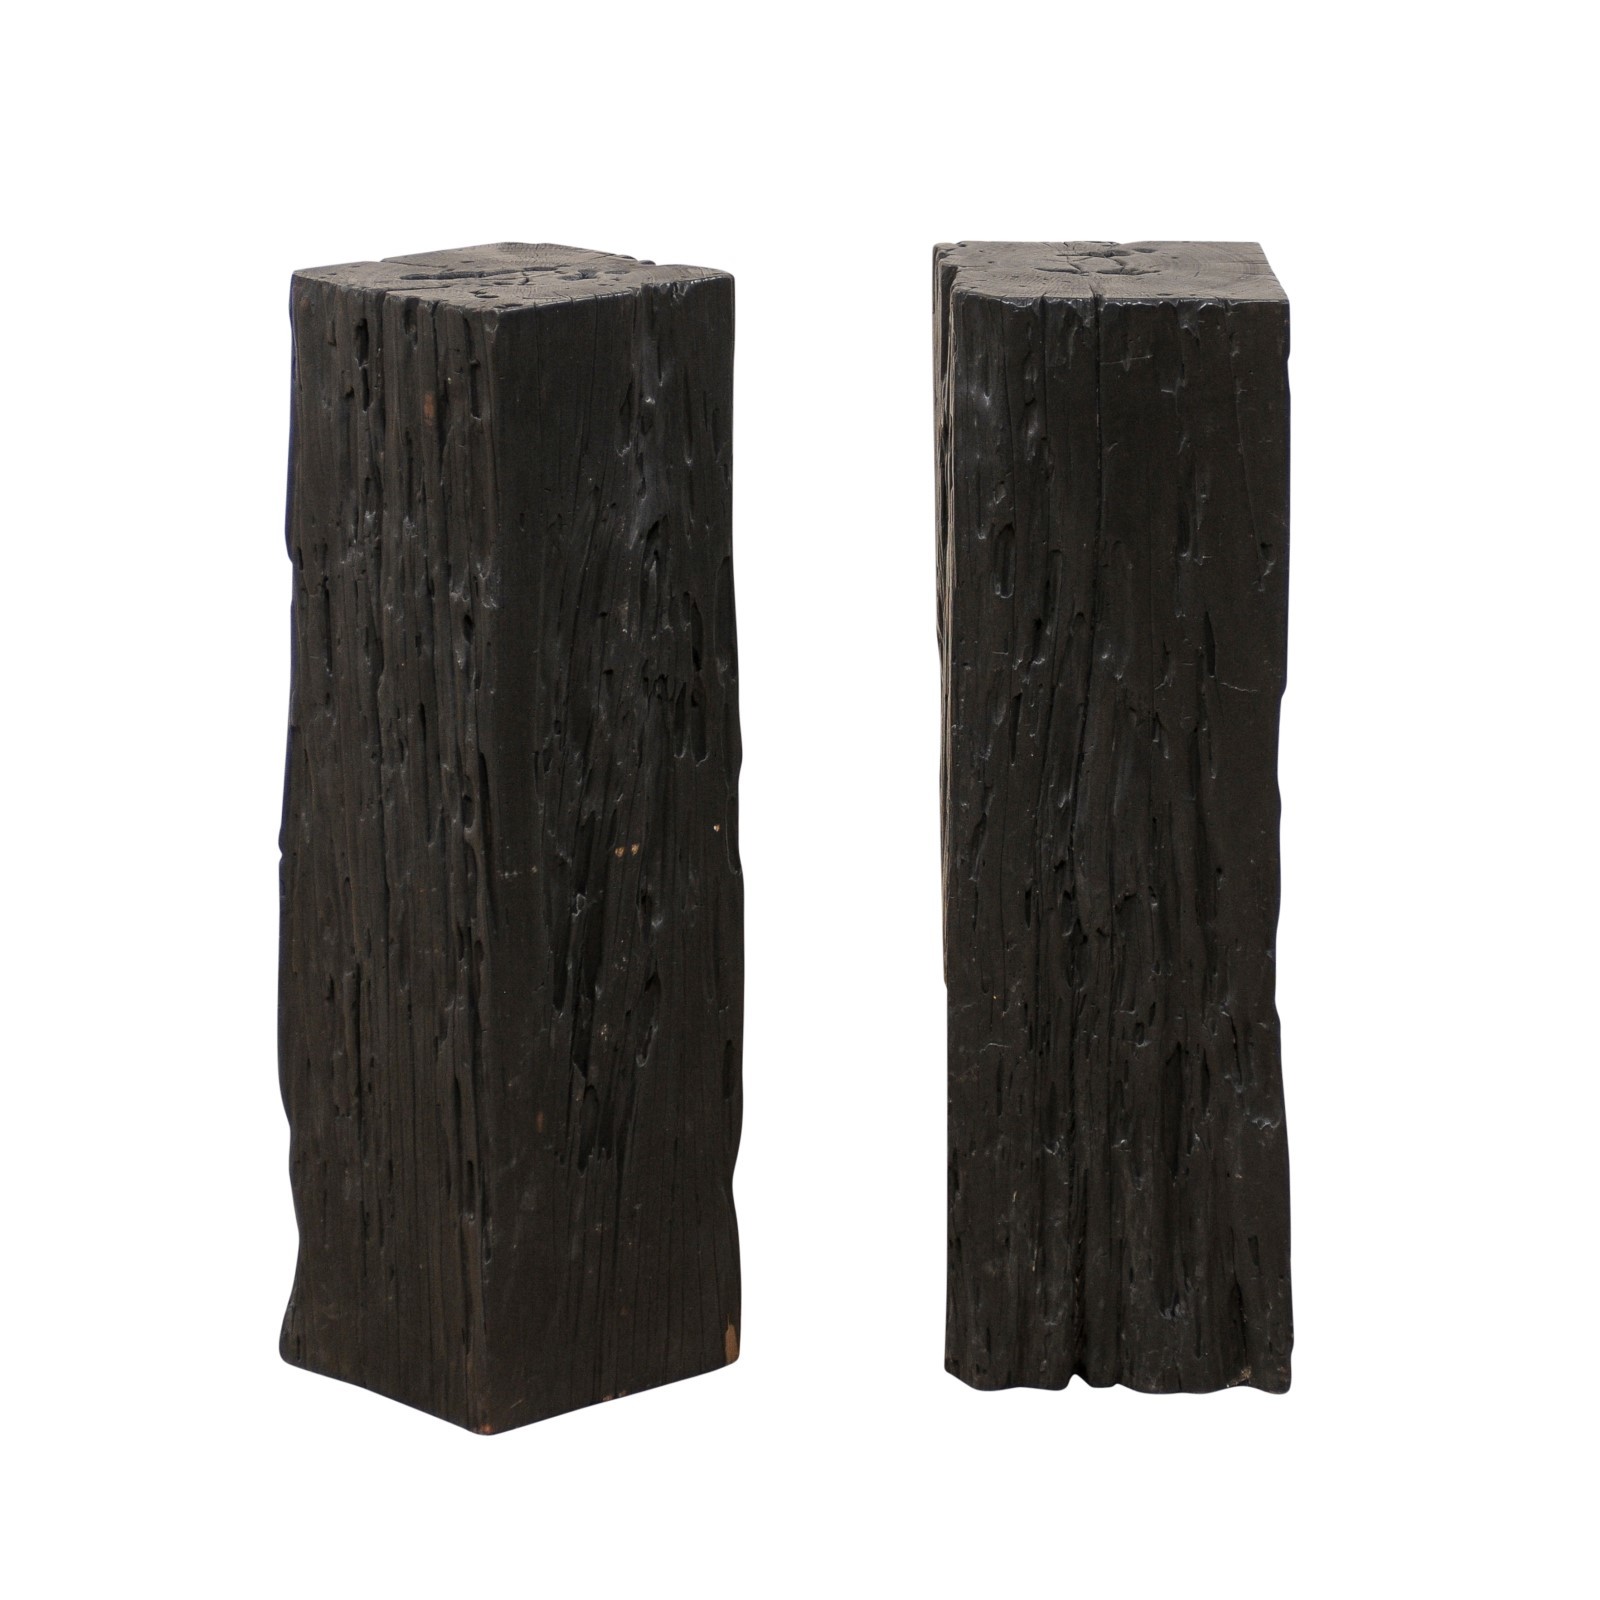 Carbonized Wood Pedestals, 29.5" Tall